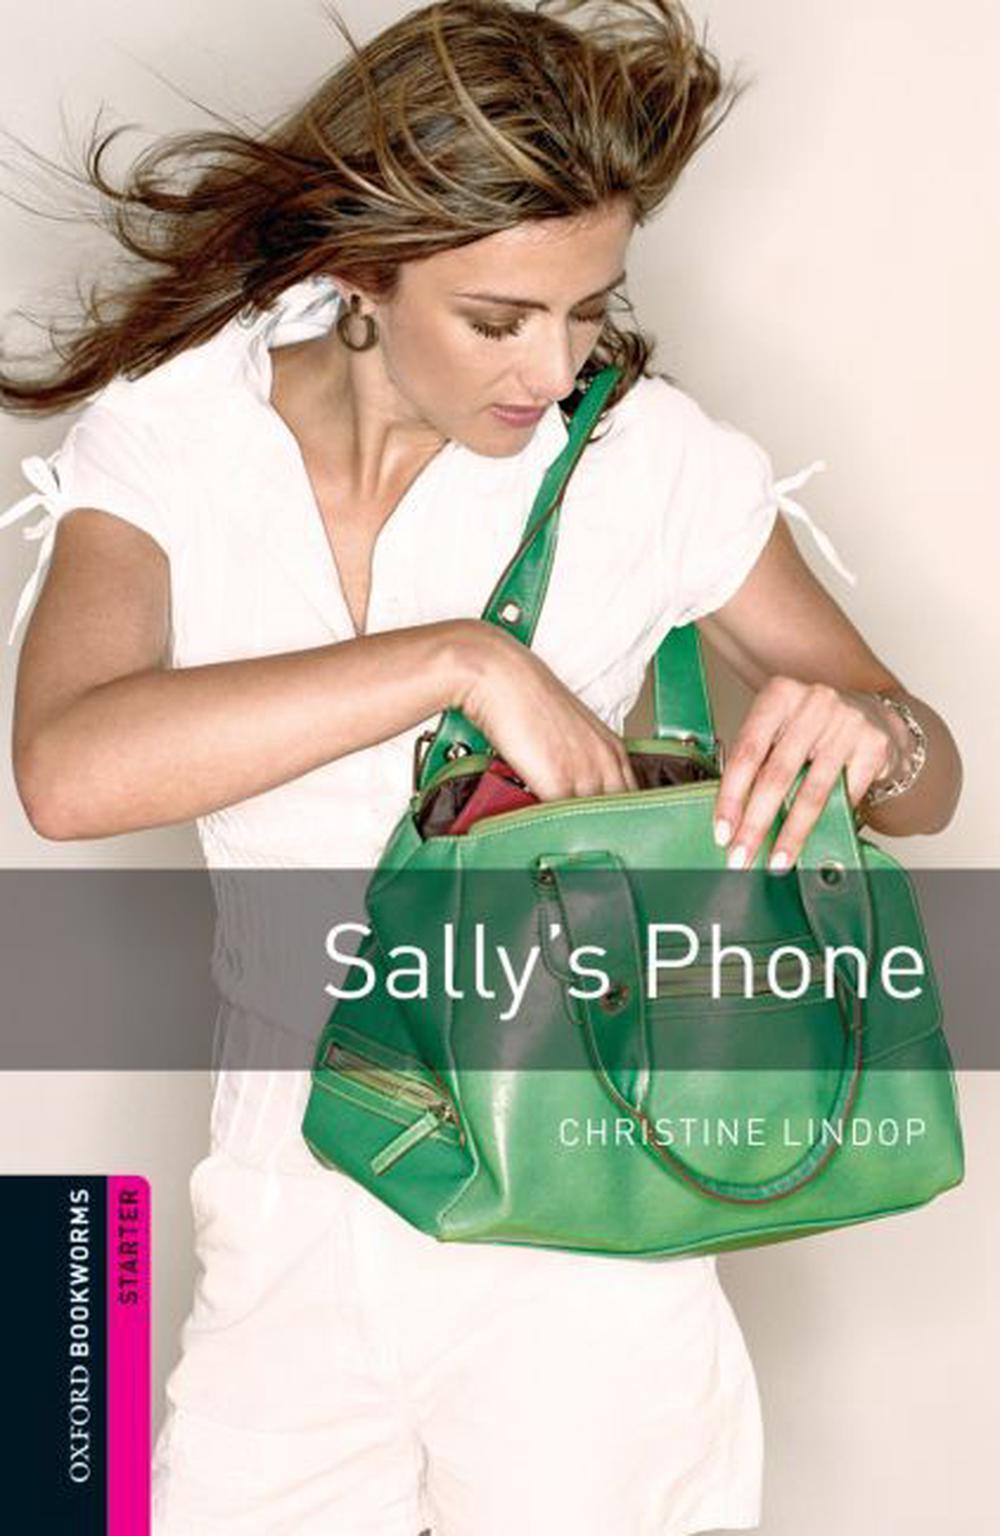 Christine　Phone　Oxford　Lindop,　Paperback,　9780194234269　Buy　Bookworms　Library:　The　Nile　Starter　Level::　online　Sally's　by　at